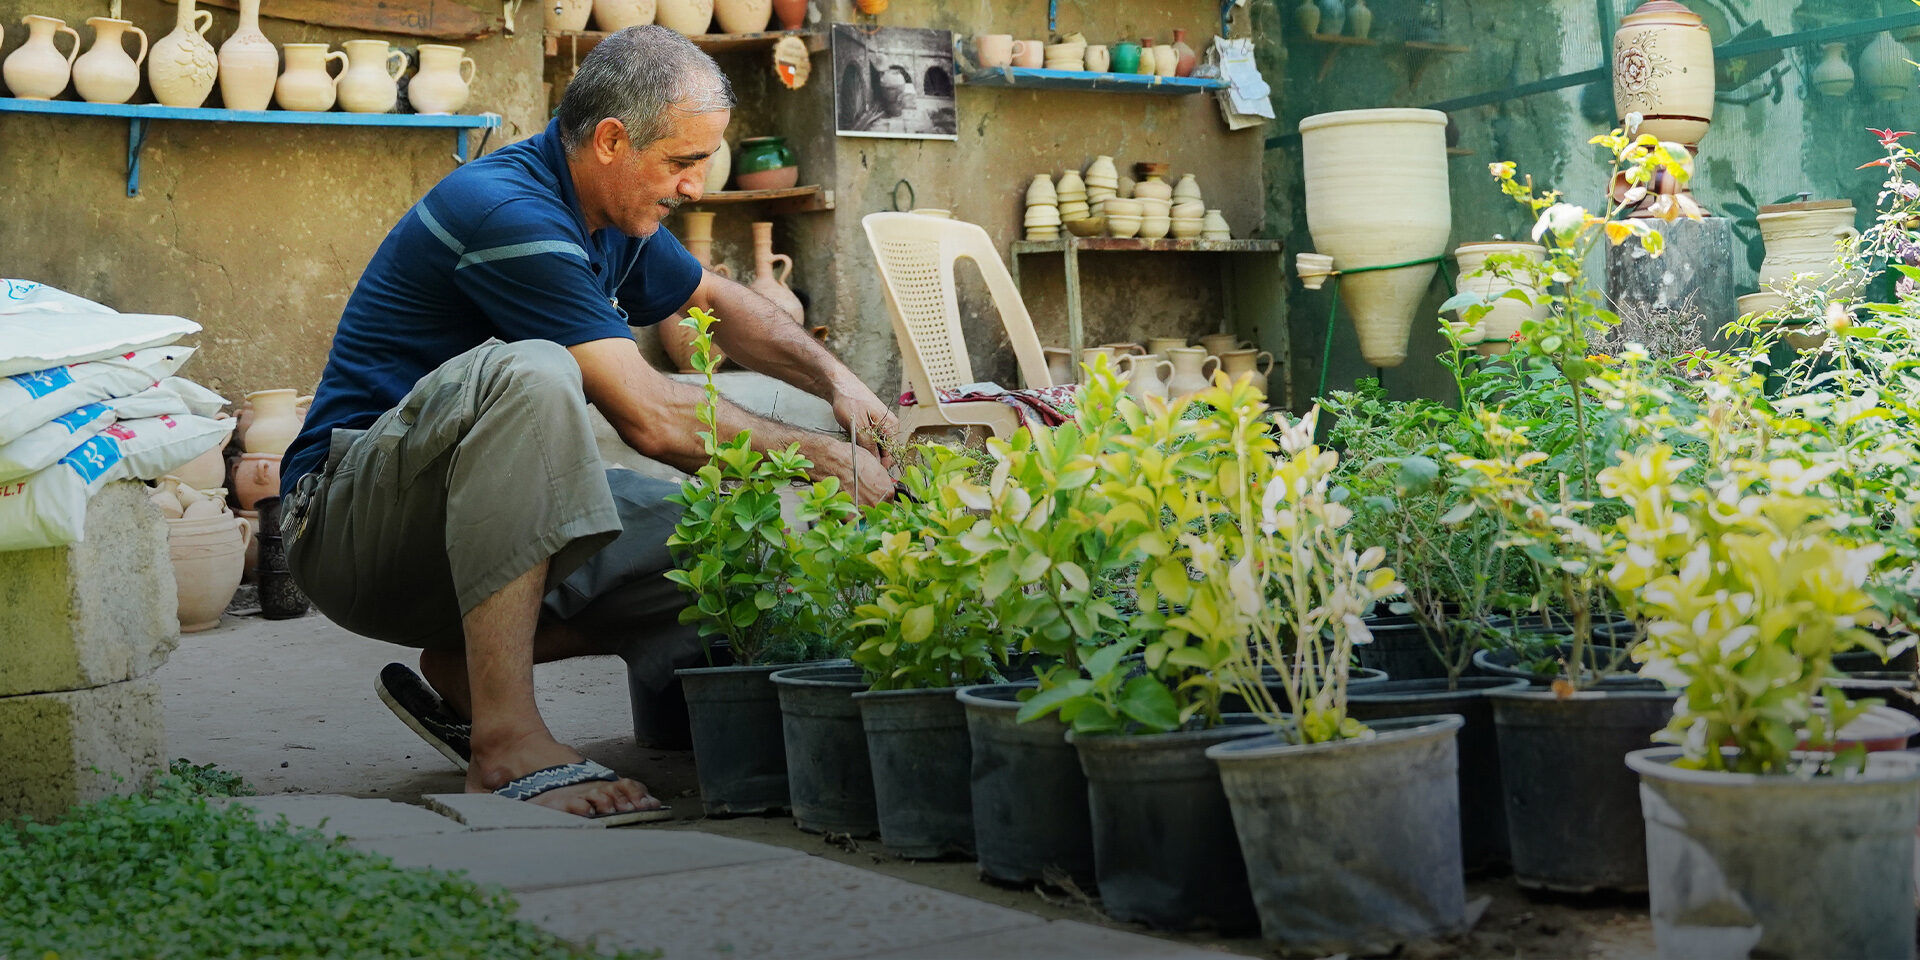 A man kneeling beside several potted plants and trimming their leaves.